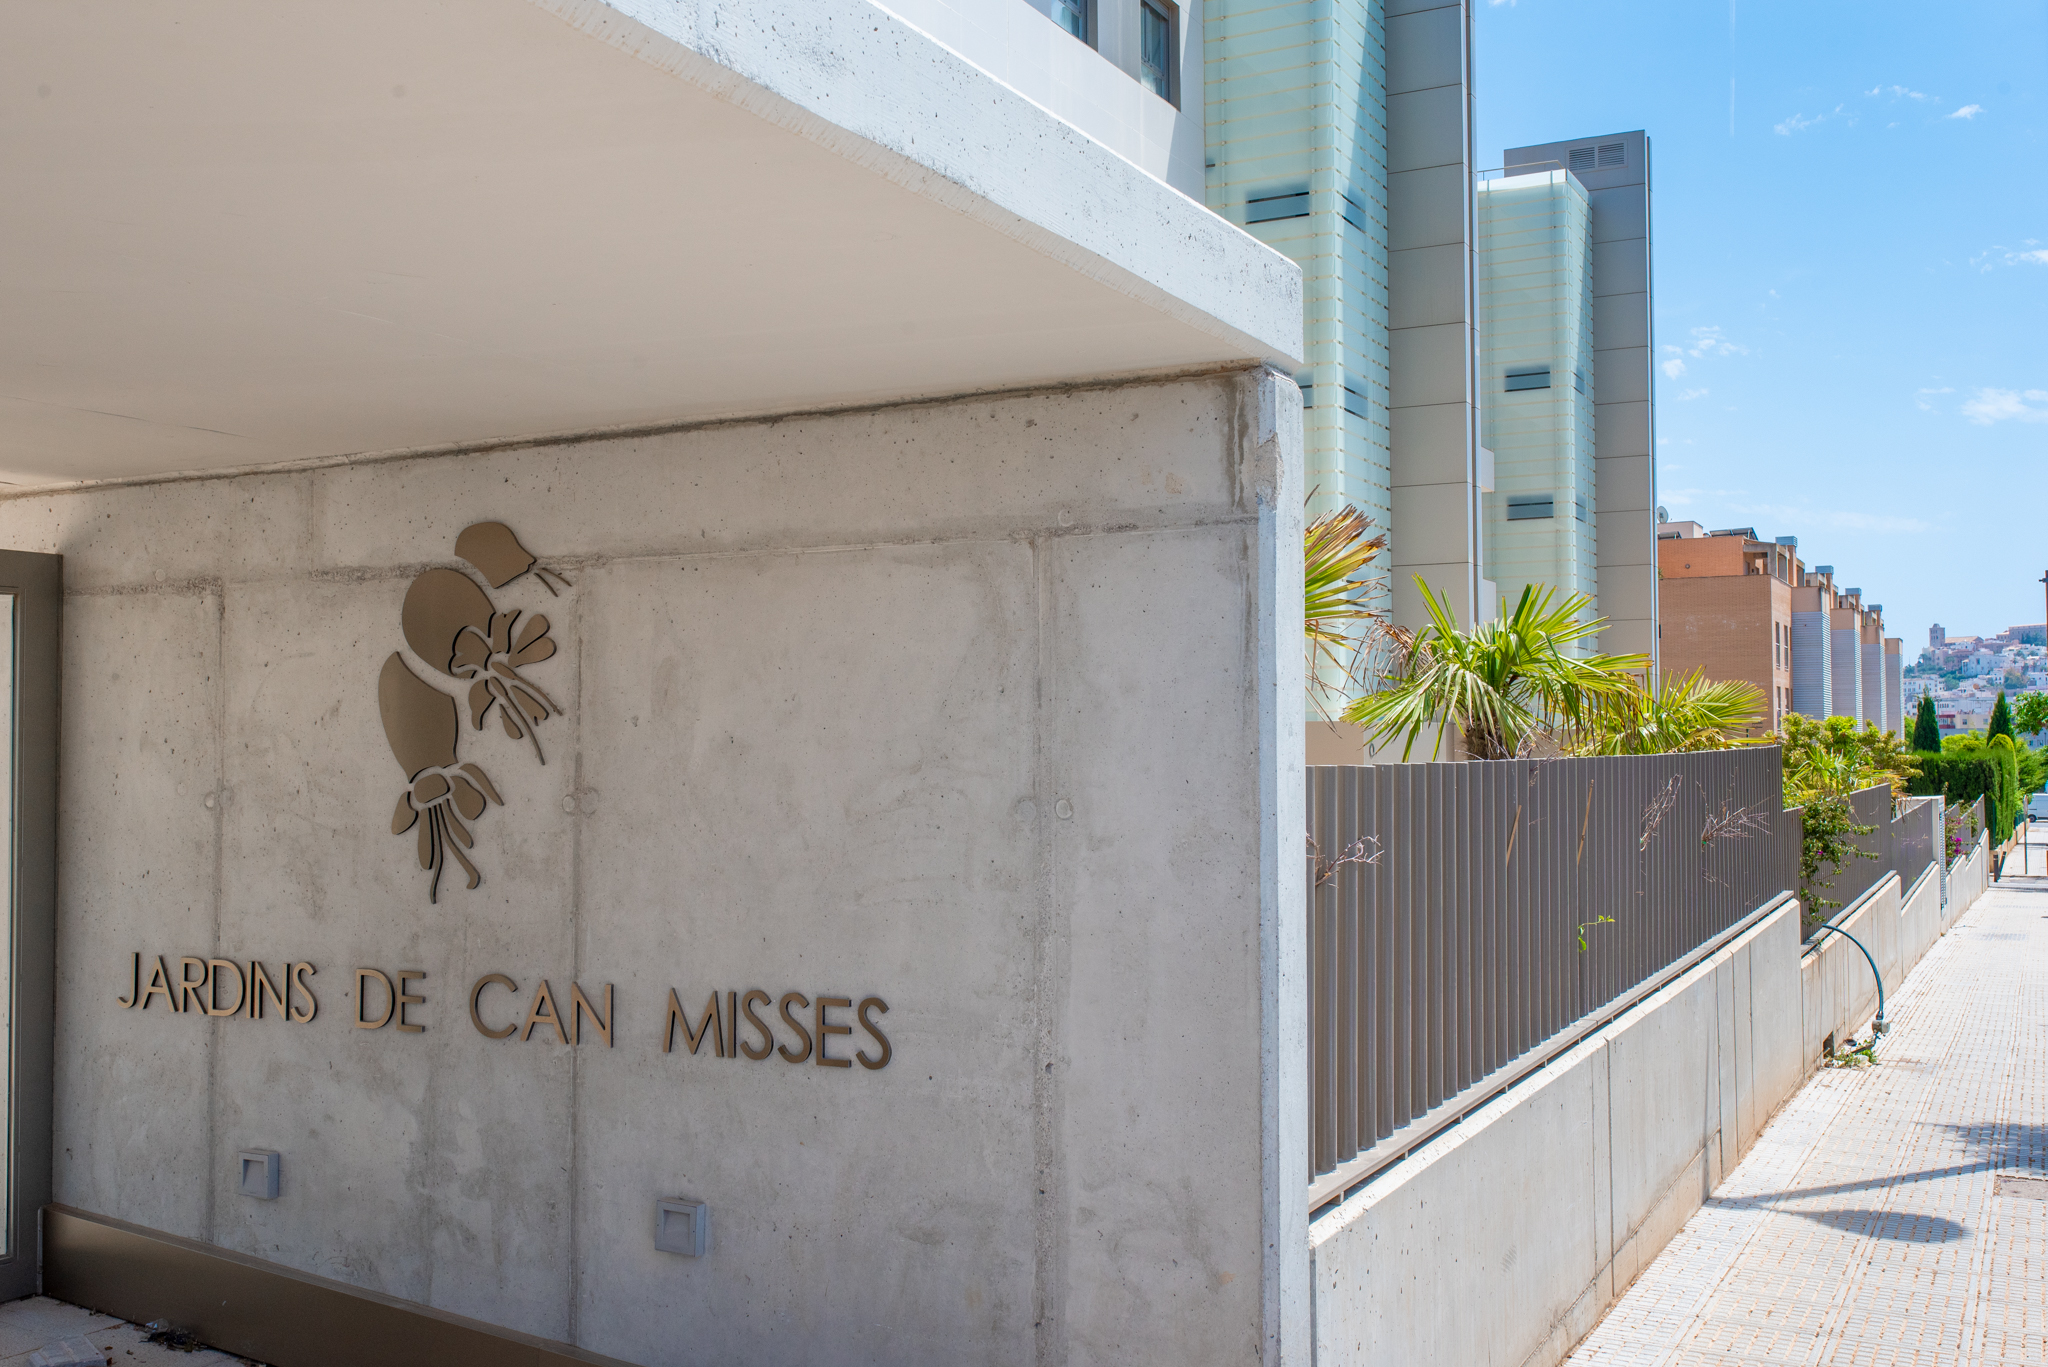 4-Bed Apartment on the 2nd Floor in Can Misses, Ibiza